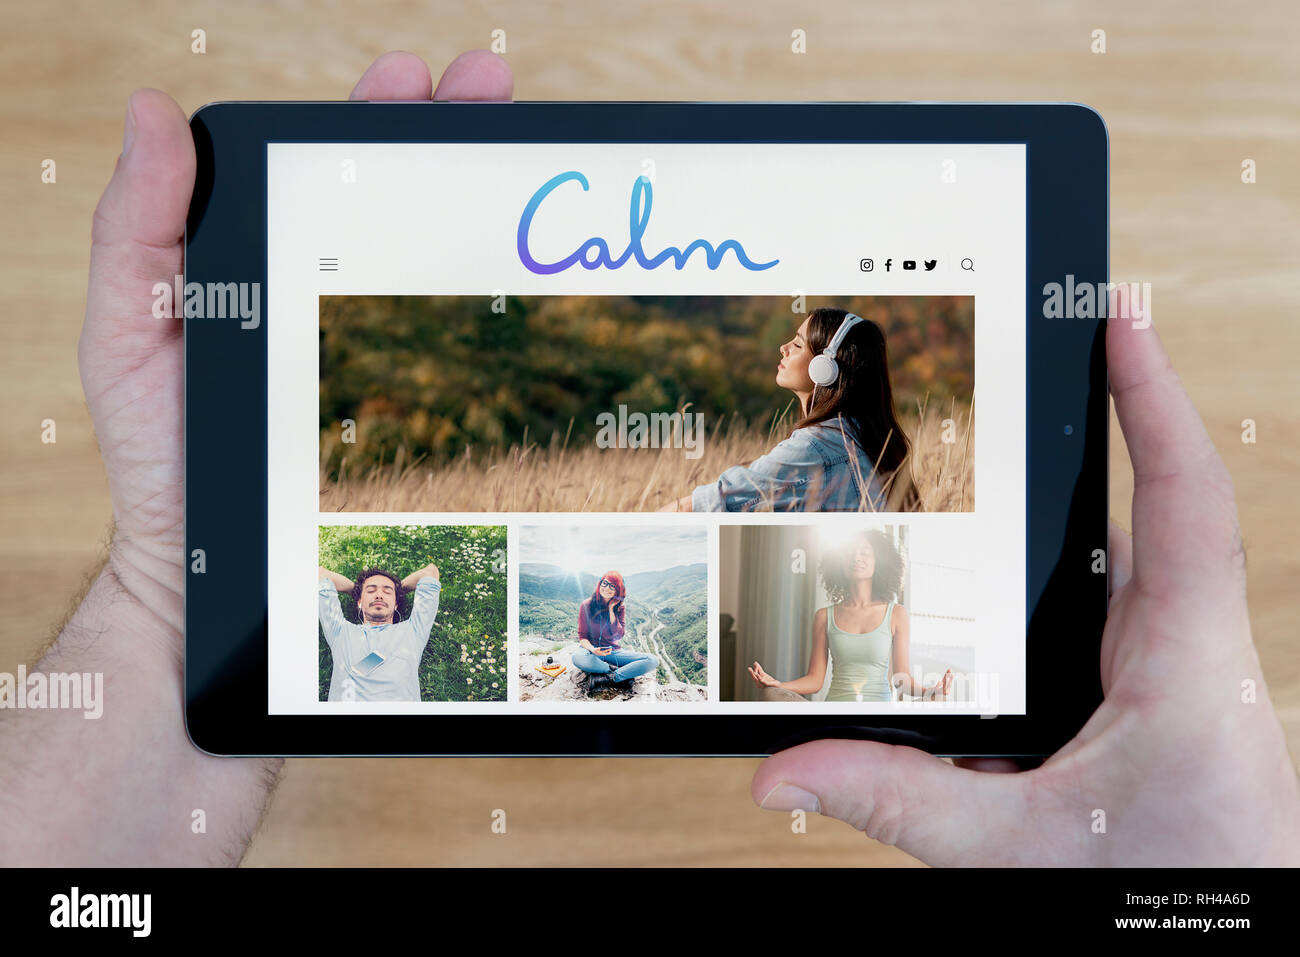 Page 3 - Calm App High Resolution Stock Photography and Images - Alamy